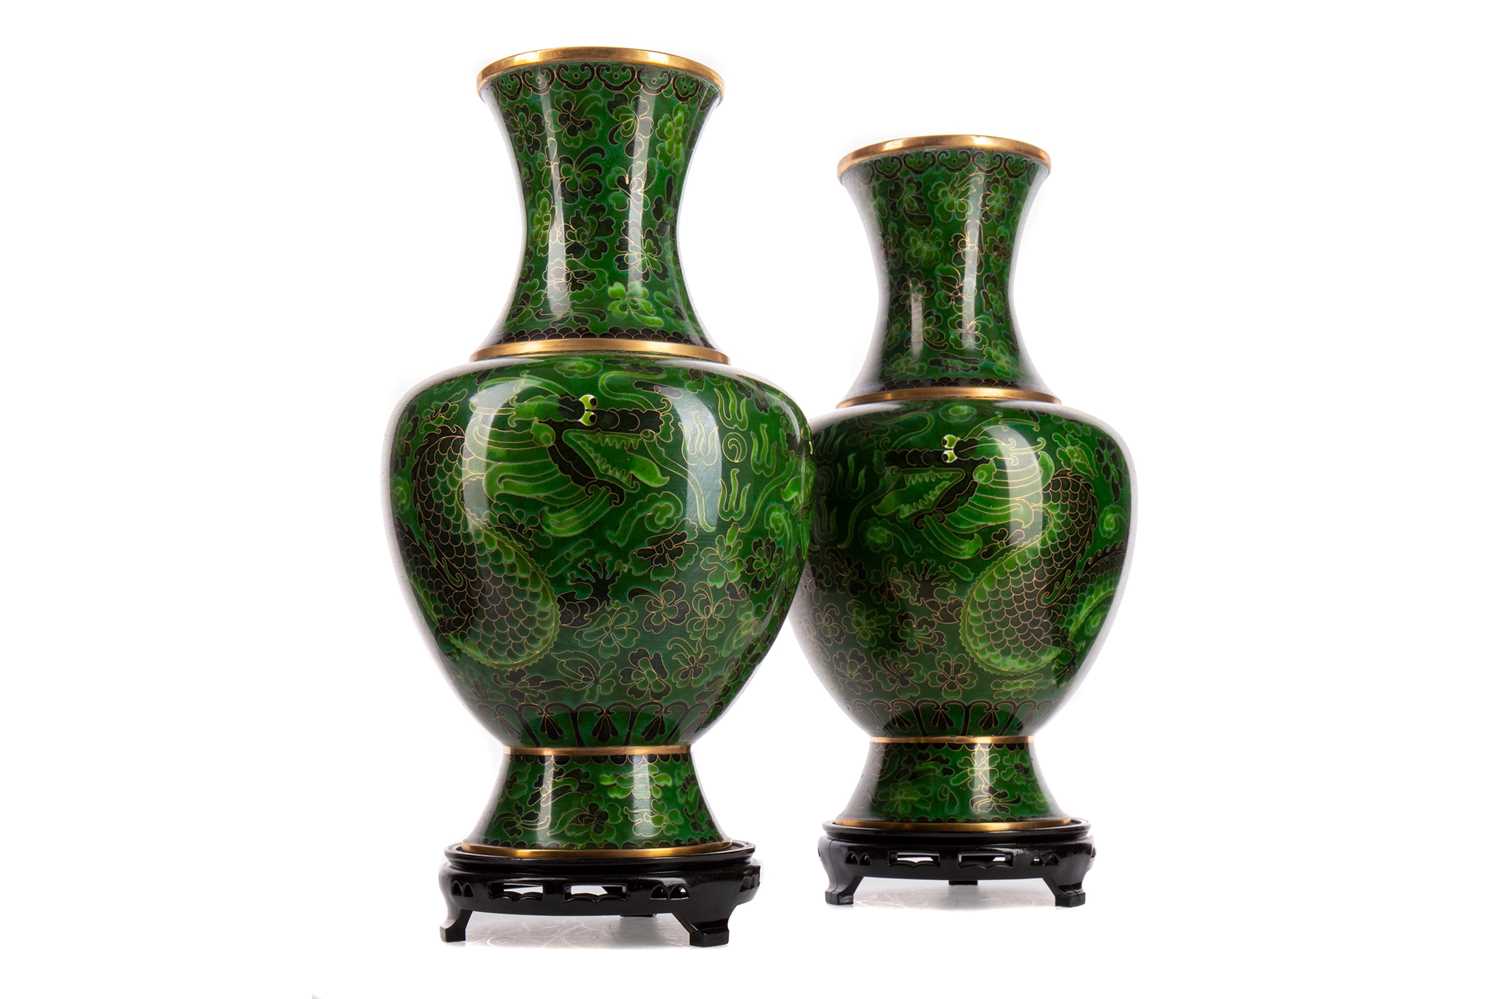 Lot 1056 - A PAIR OF CHINESE CLOISONNE ENAMEL DRAGON VASES